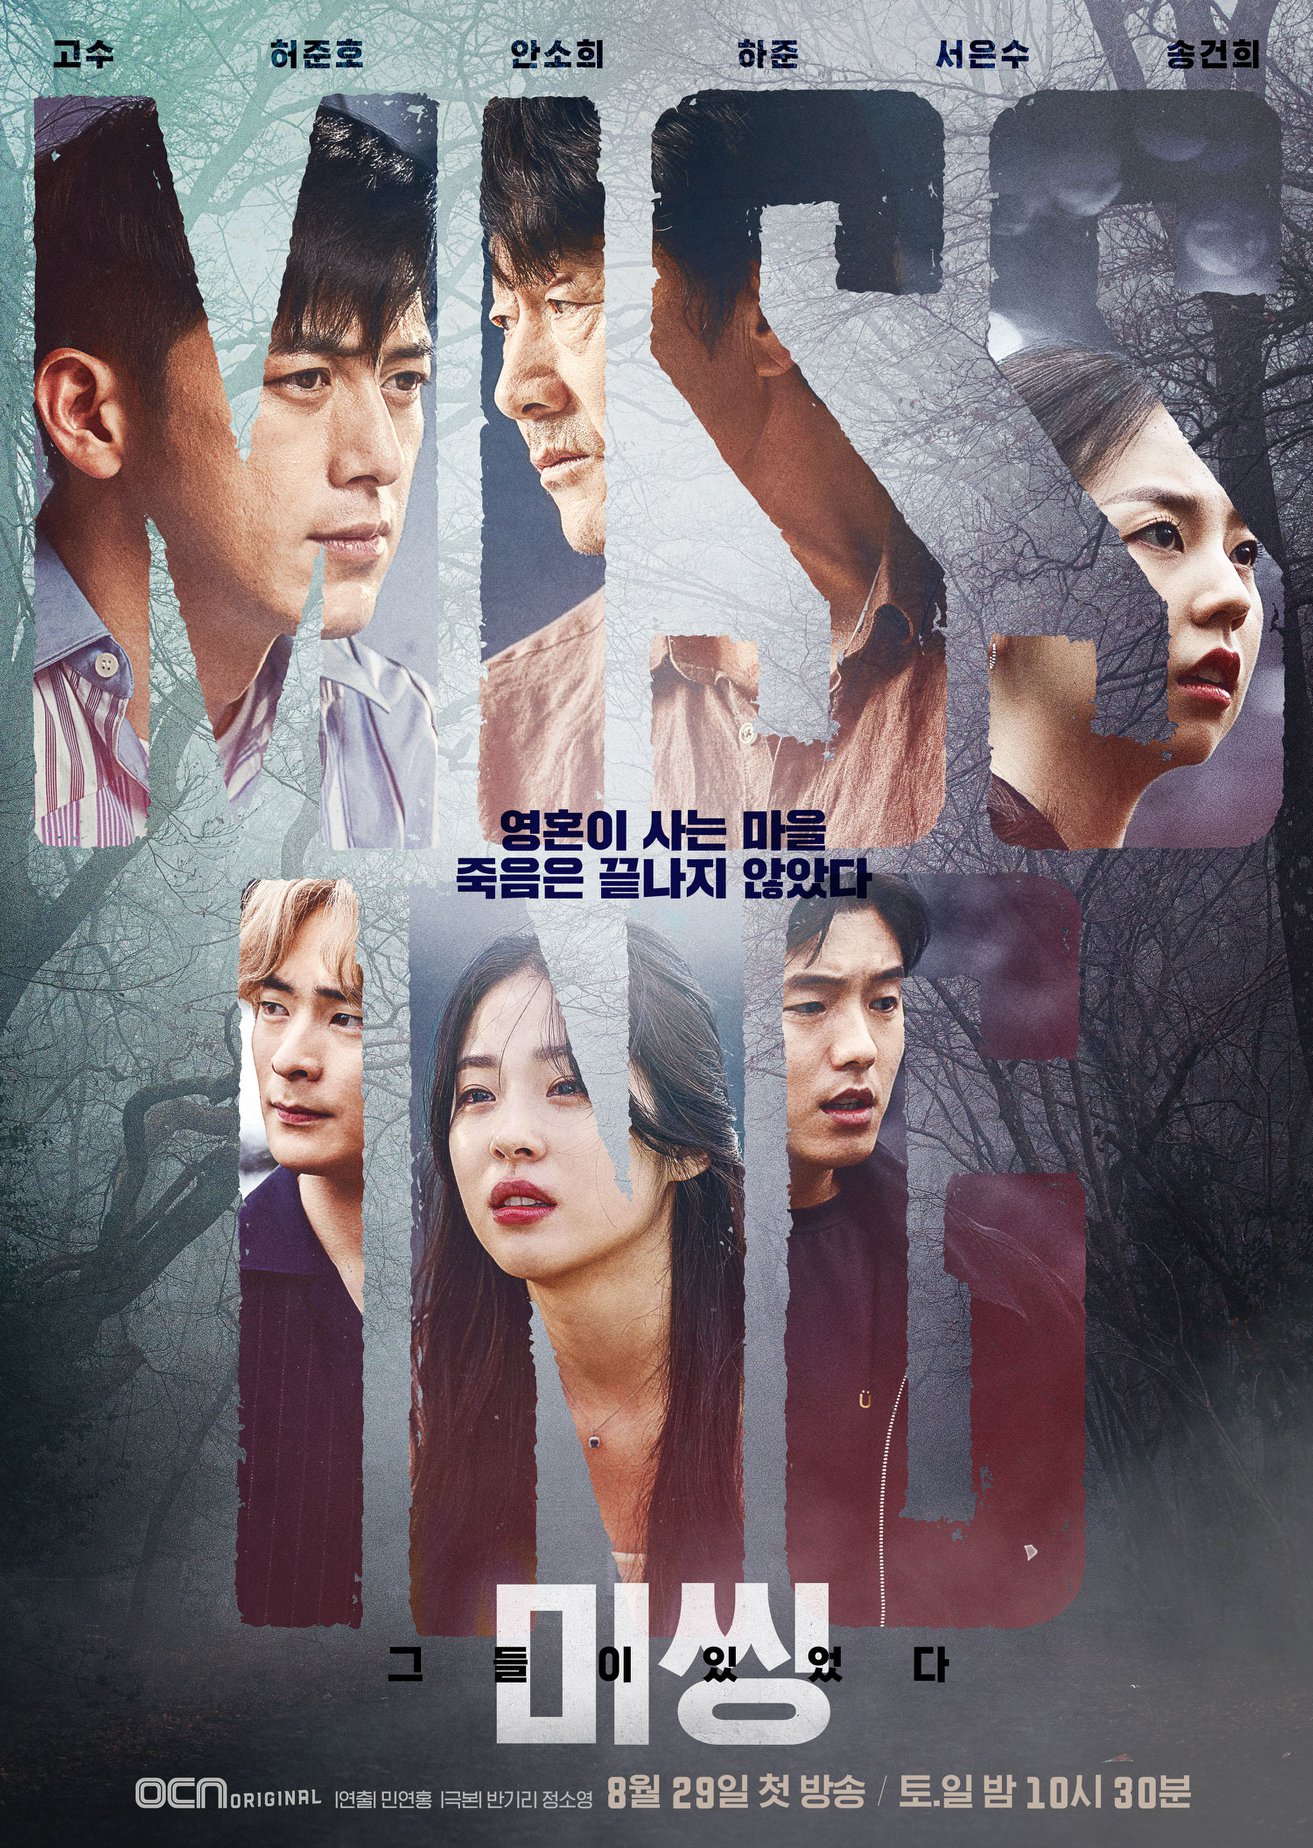 drama-missing-the-other-side-main-posters-go-soo-ahn-so-hee-1